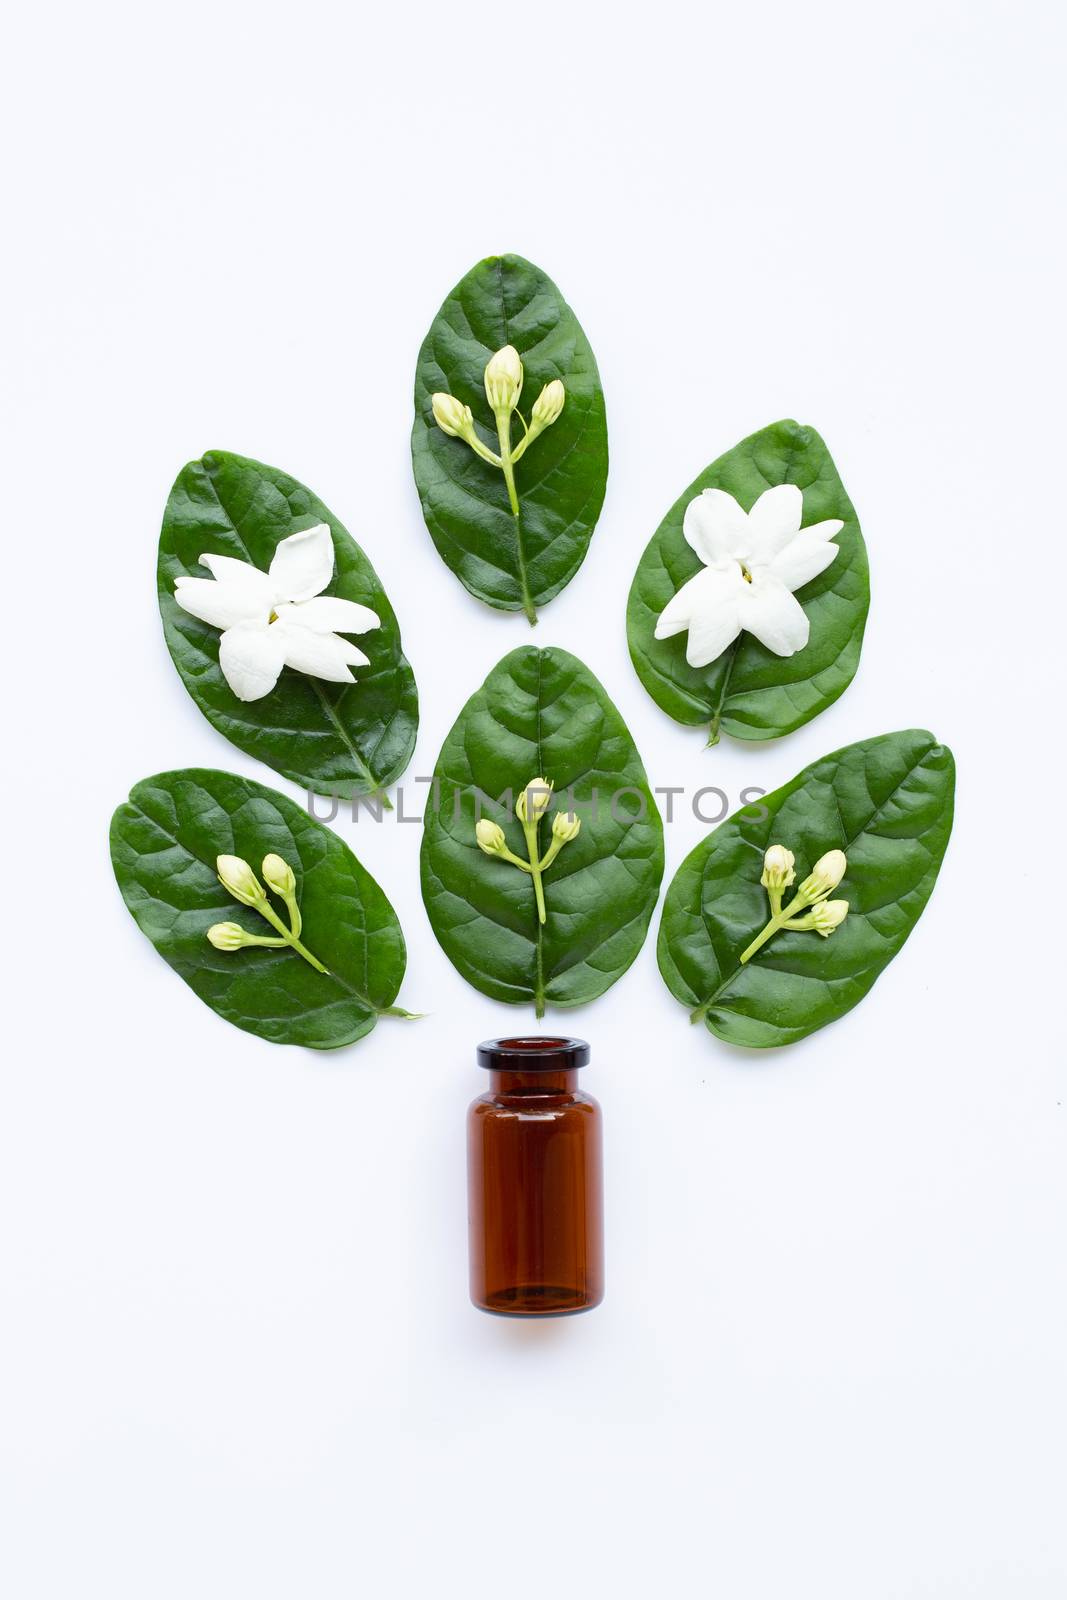 Bottle of essential oil with jasmine flower and leaves on white. by Bowonpat